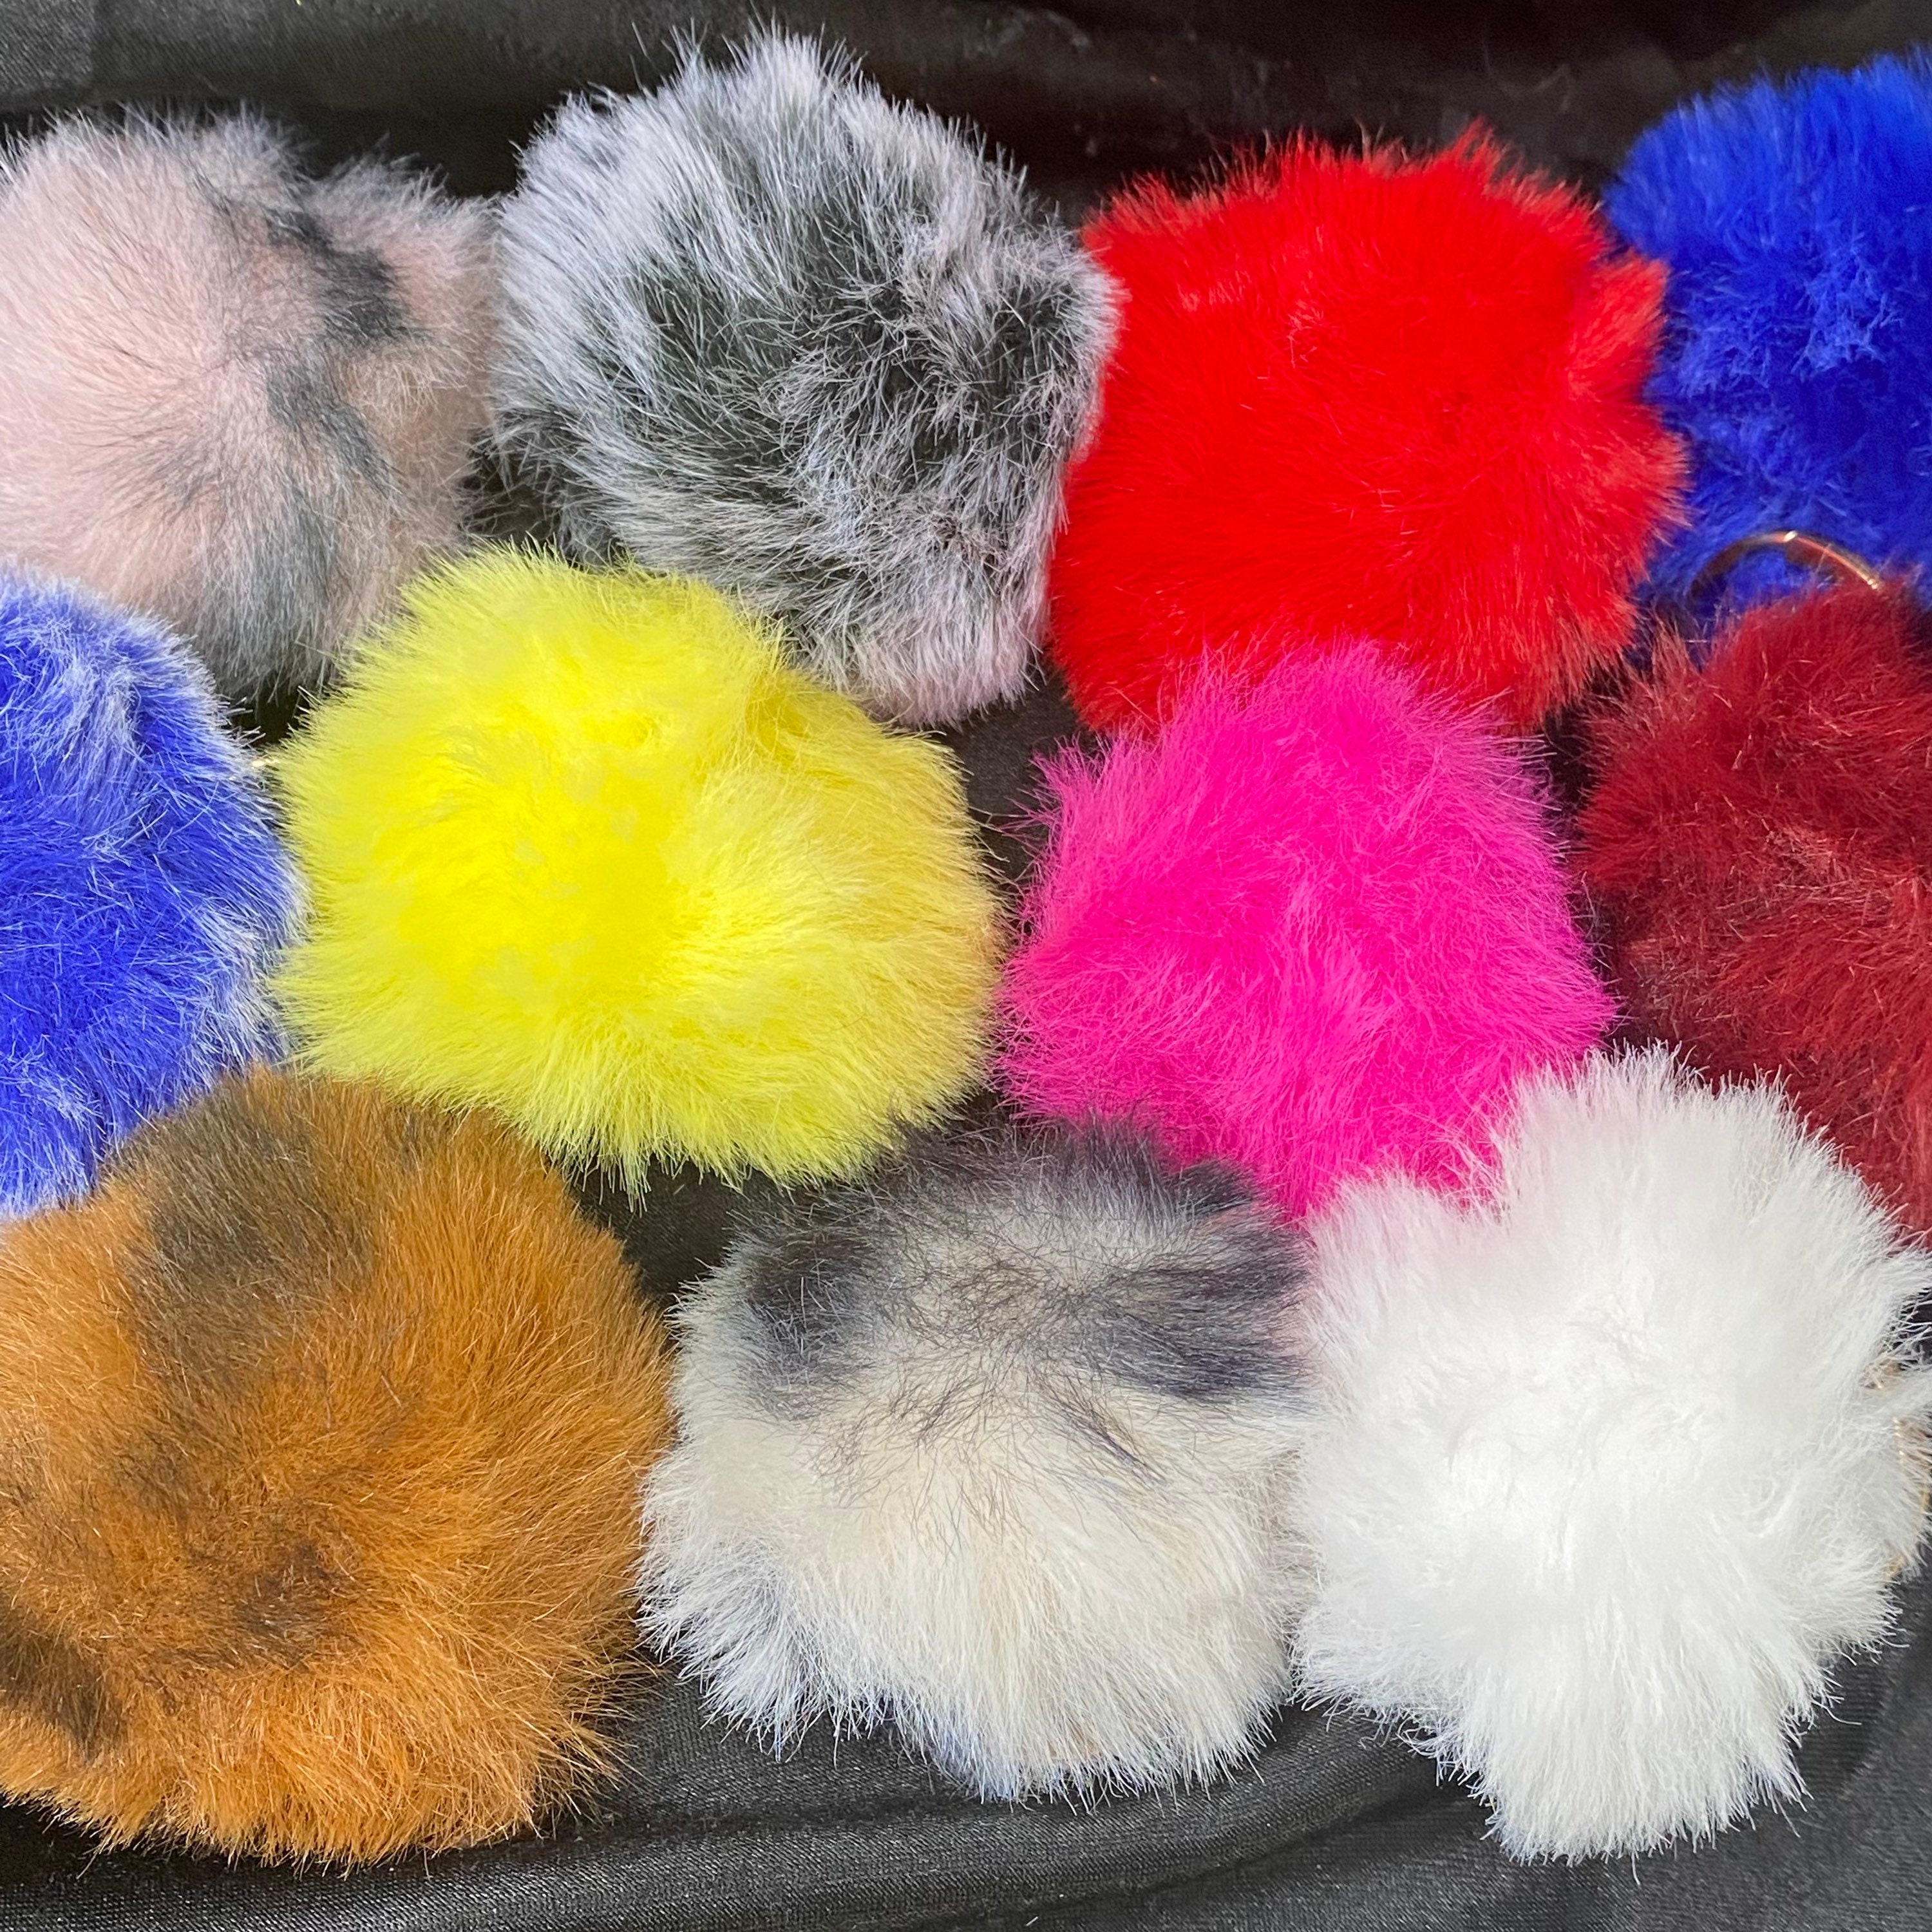 Artificial Raccoon Hair in 16 Colors Shoes Scarf Key Chain DIY Accessories, Tengsen DIY 16 Pieces /10cm Faux Fur pom pom Knitted hat Bag Gloves 